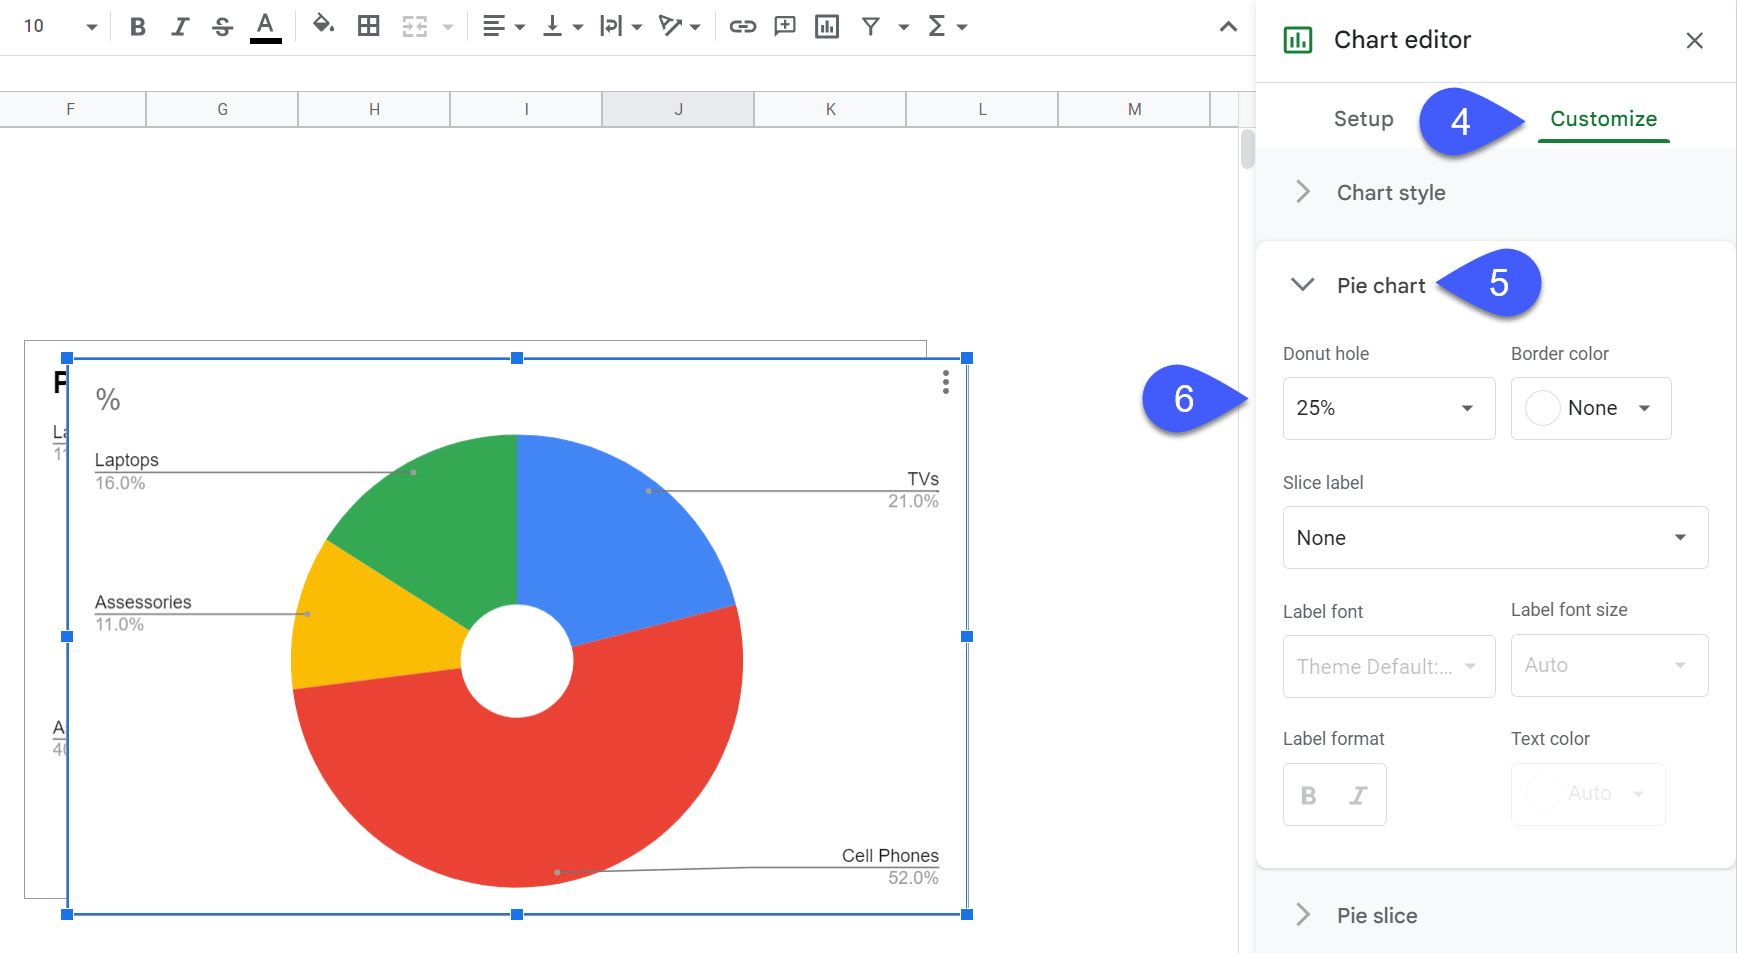 The Pie chart section